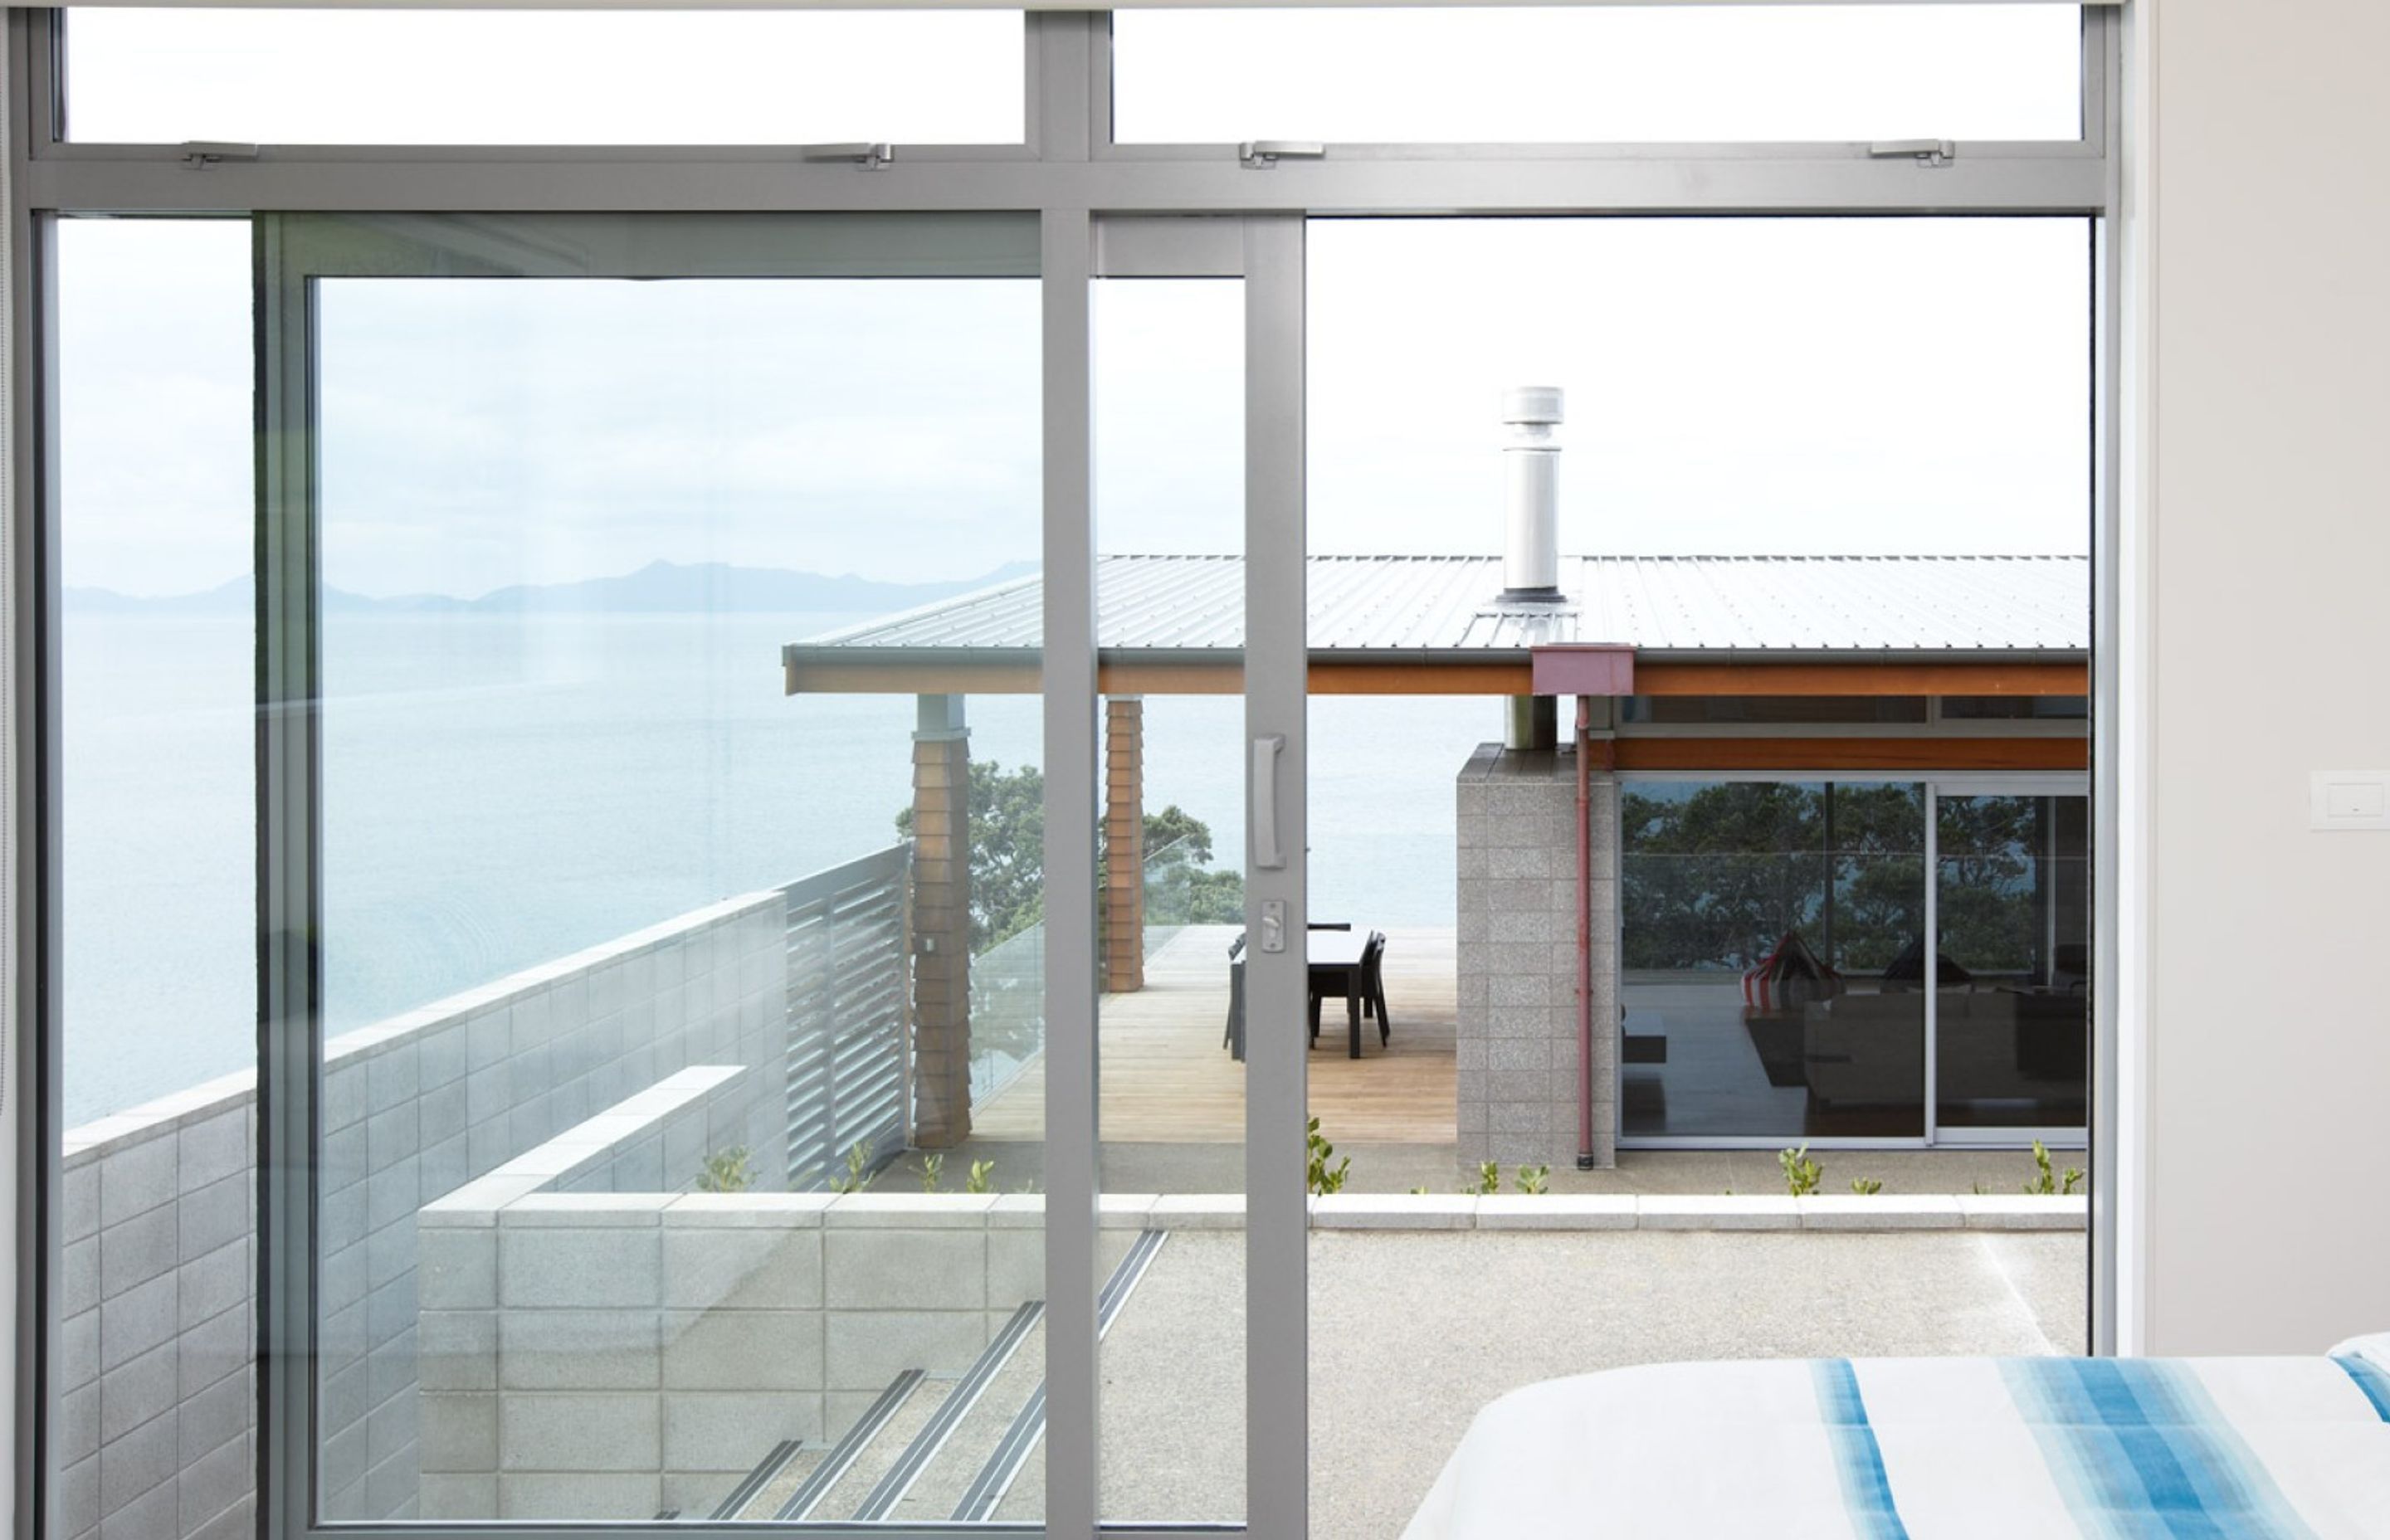 The Euroslider from Fisher Windows offers maximum protection from rain and wind without obstructing the view.